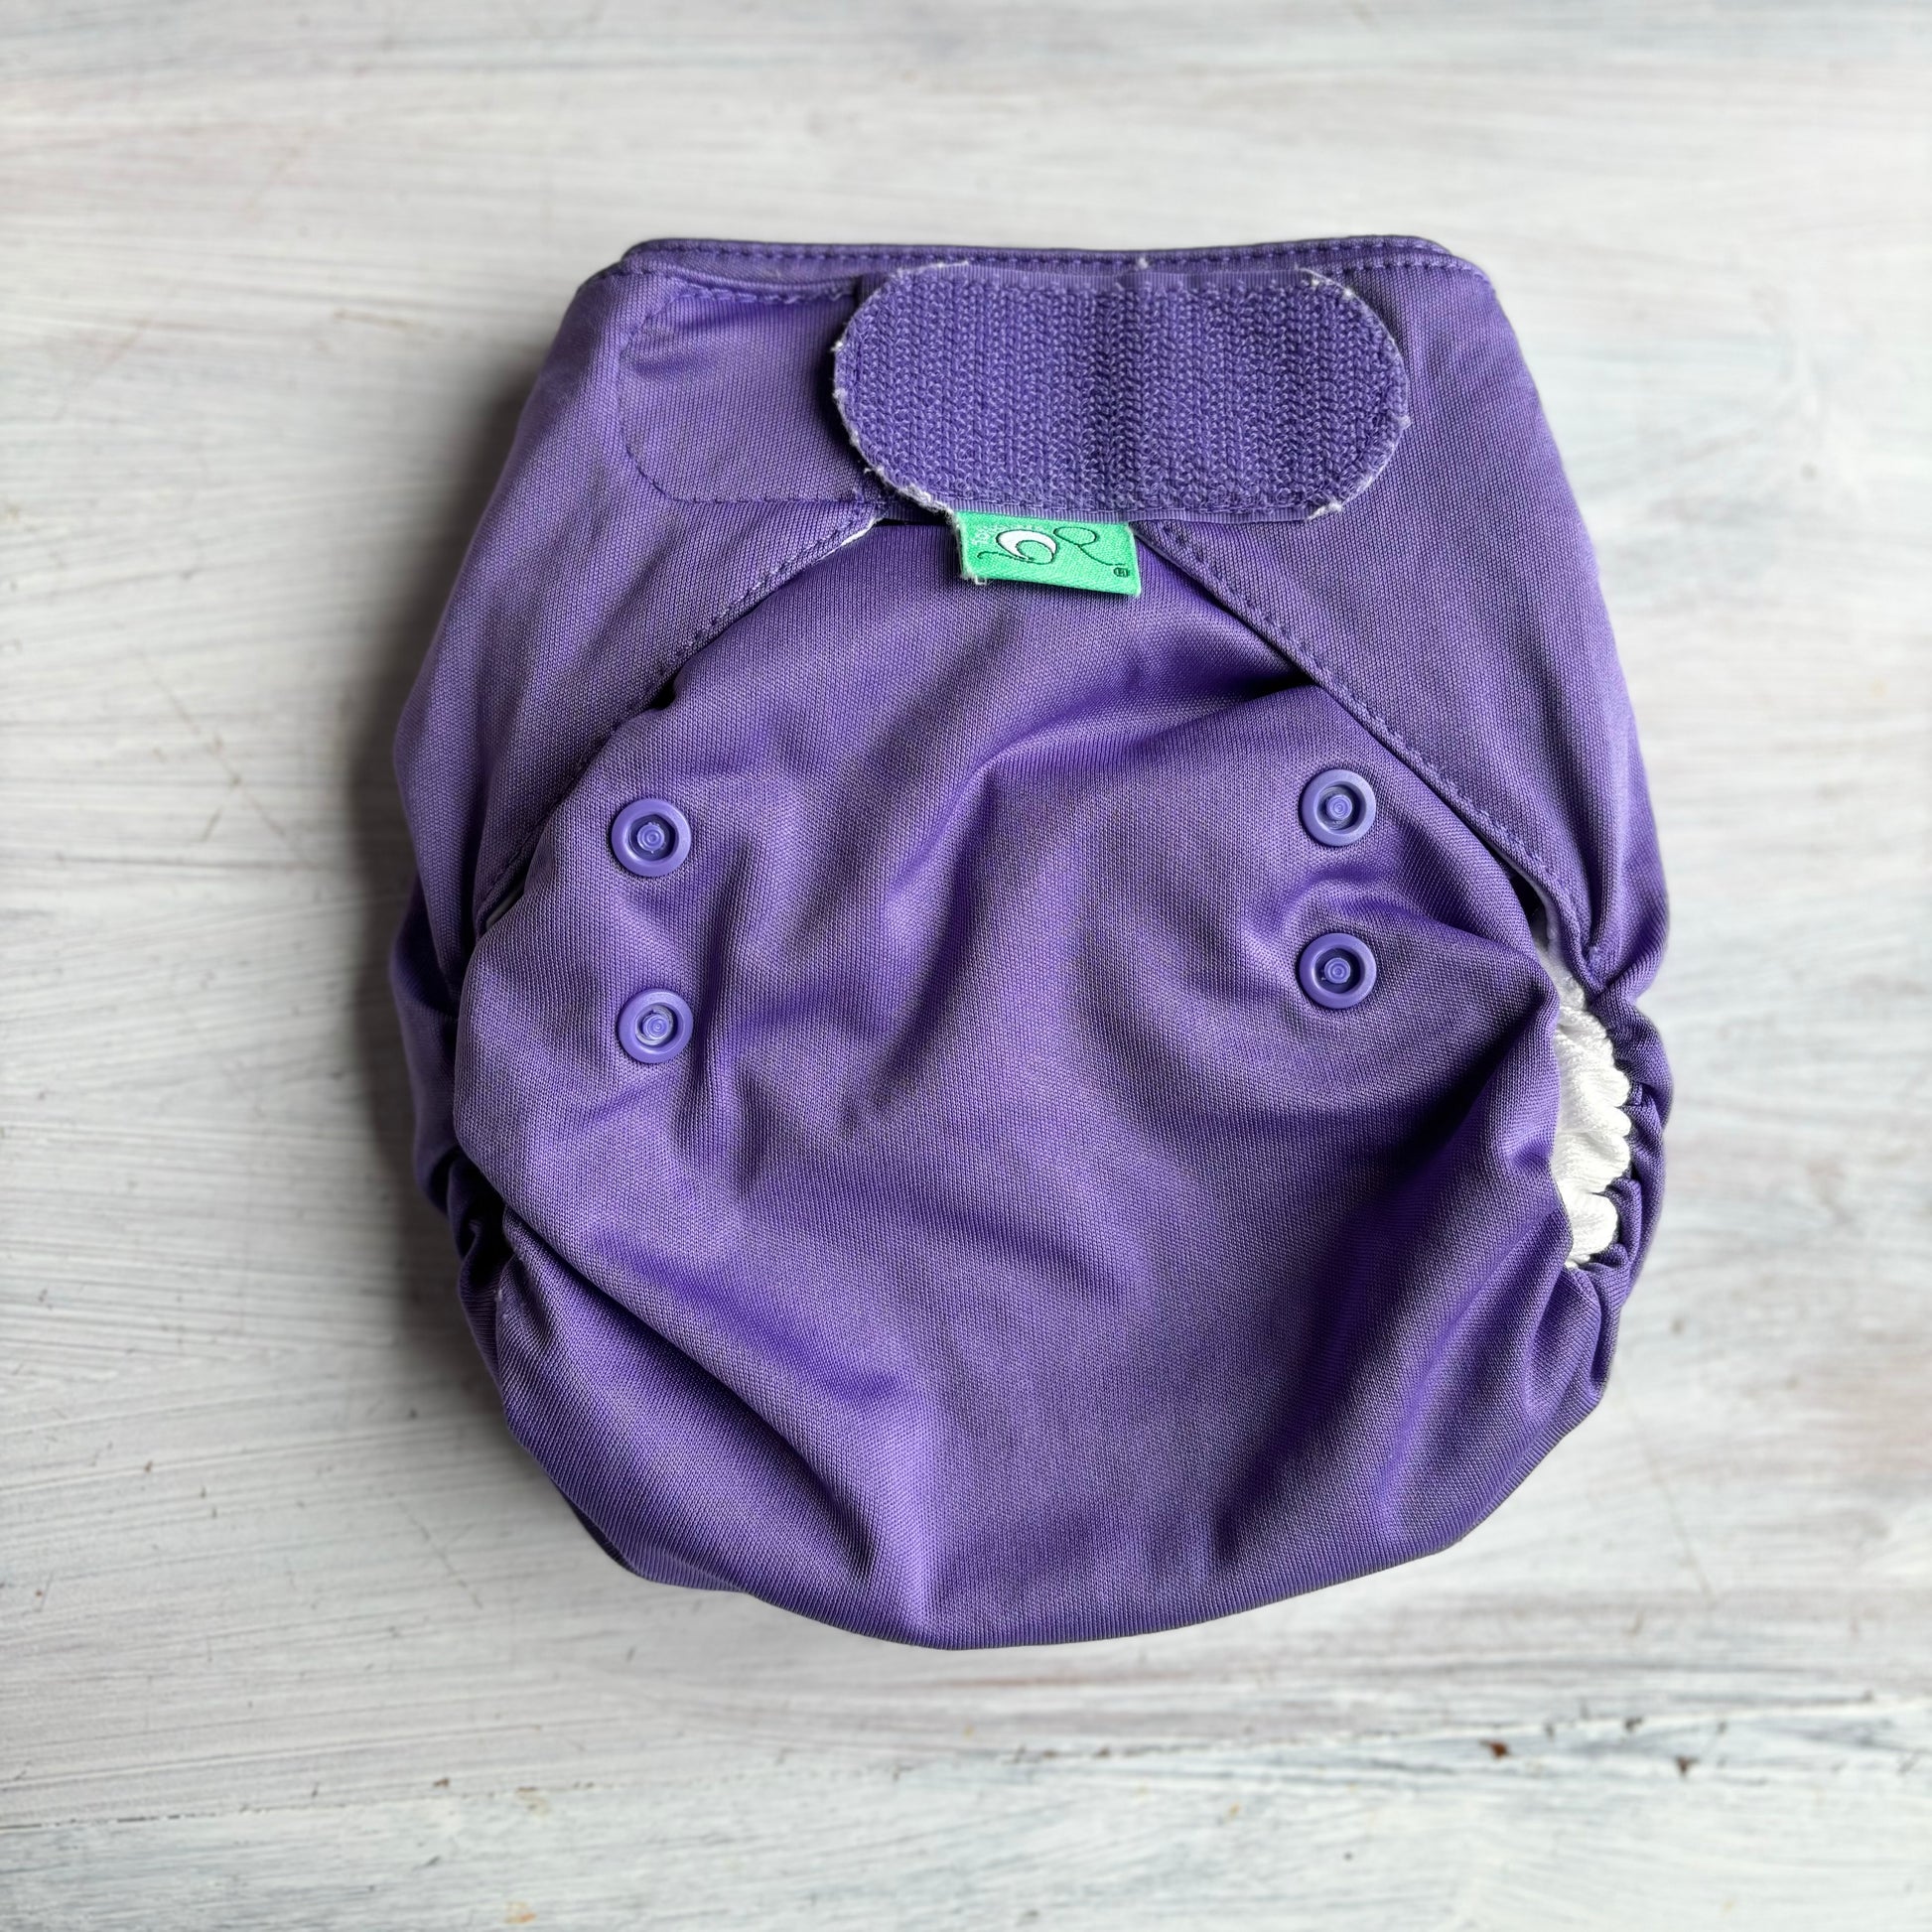 Tots Bots Easyfit All in One Nappy-All In One Nappy-Tots Bots-Purple-The Nappy Market